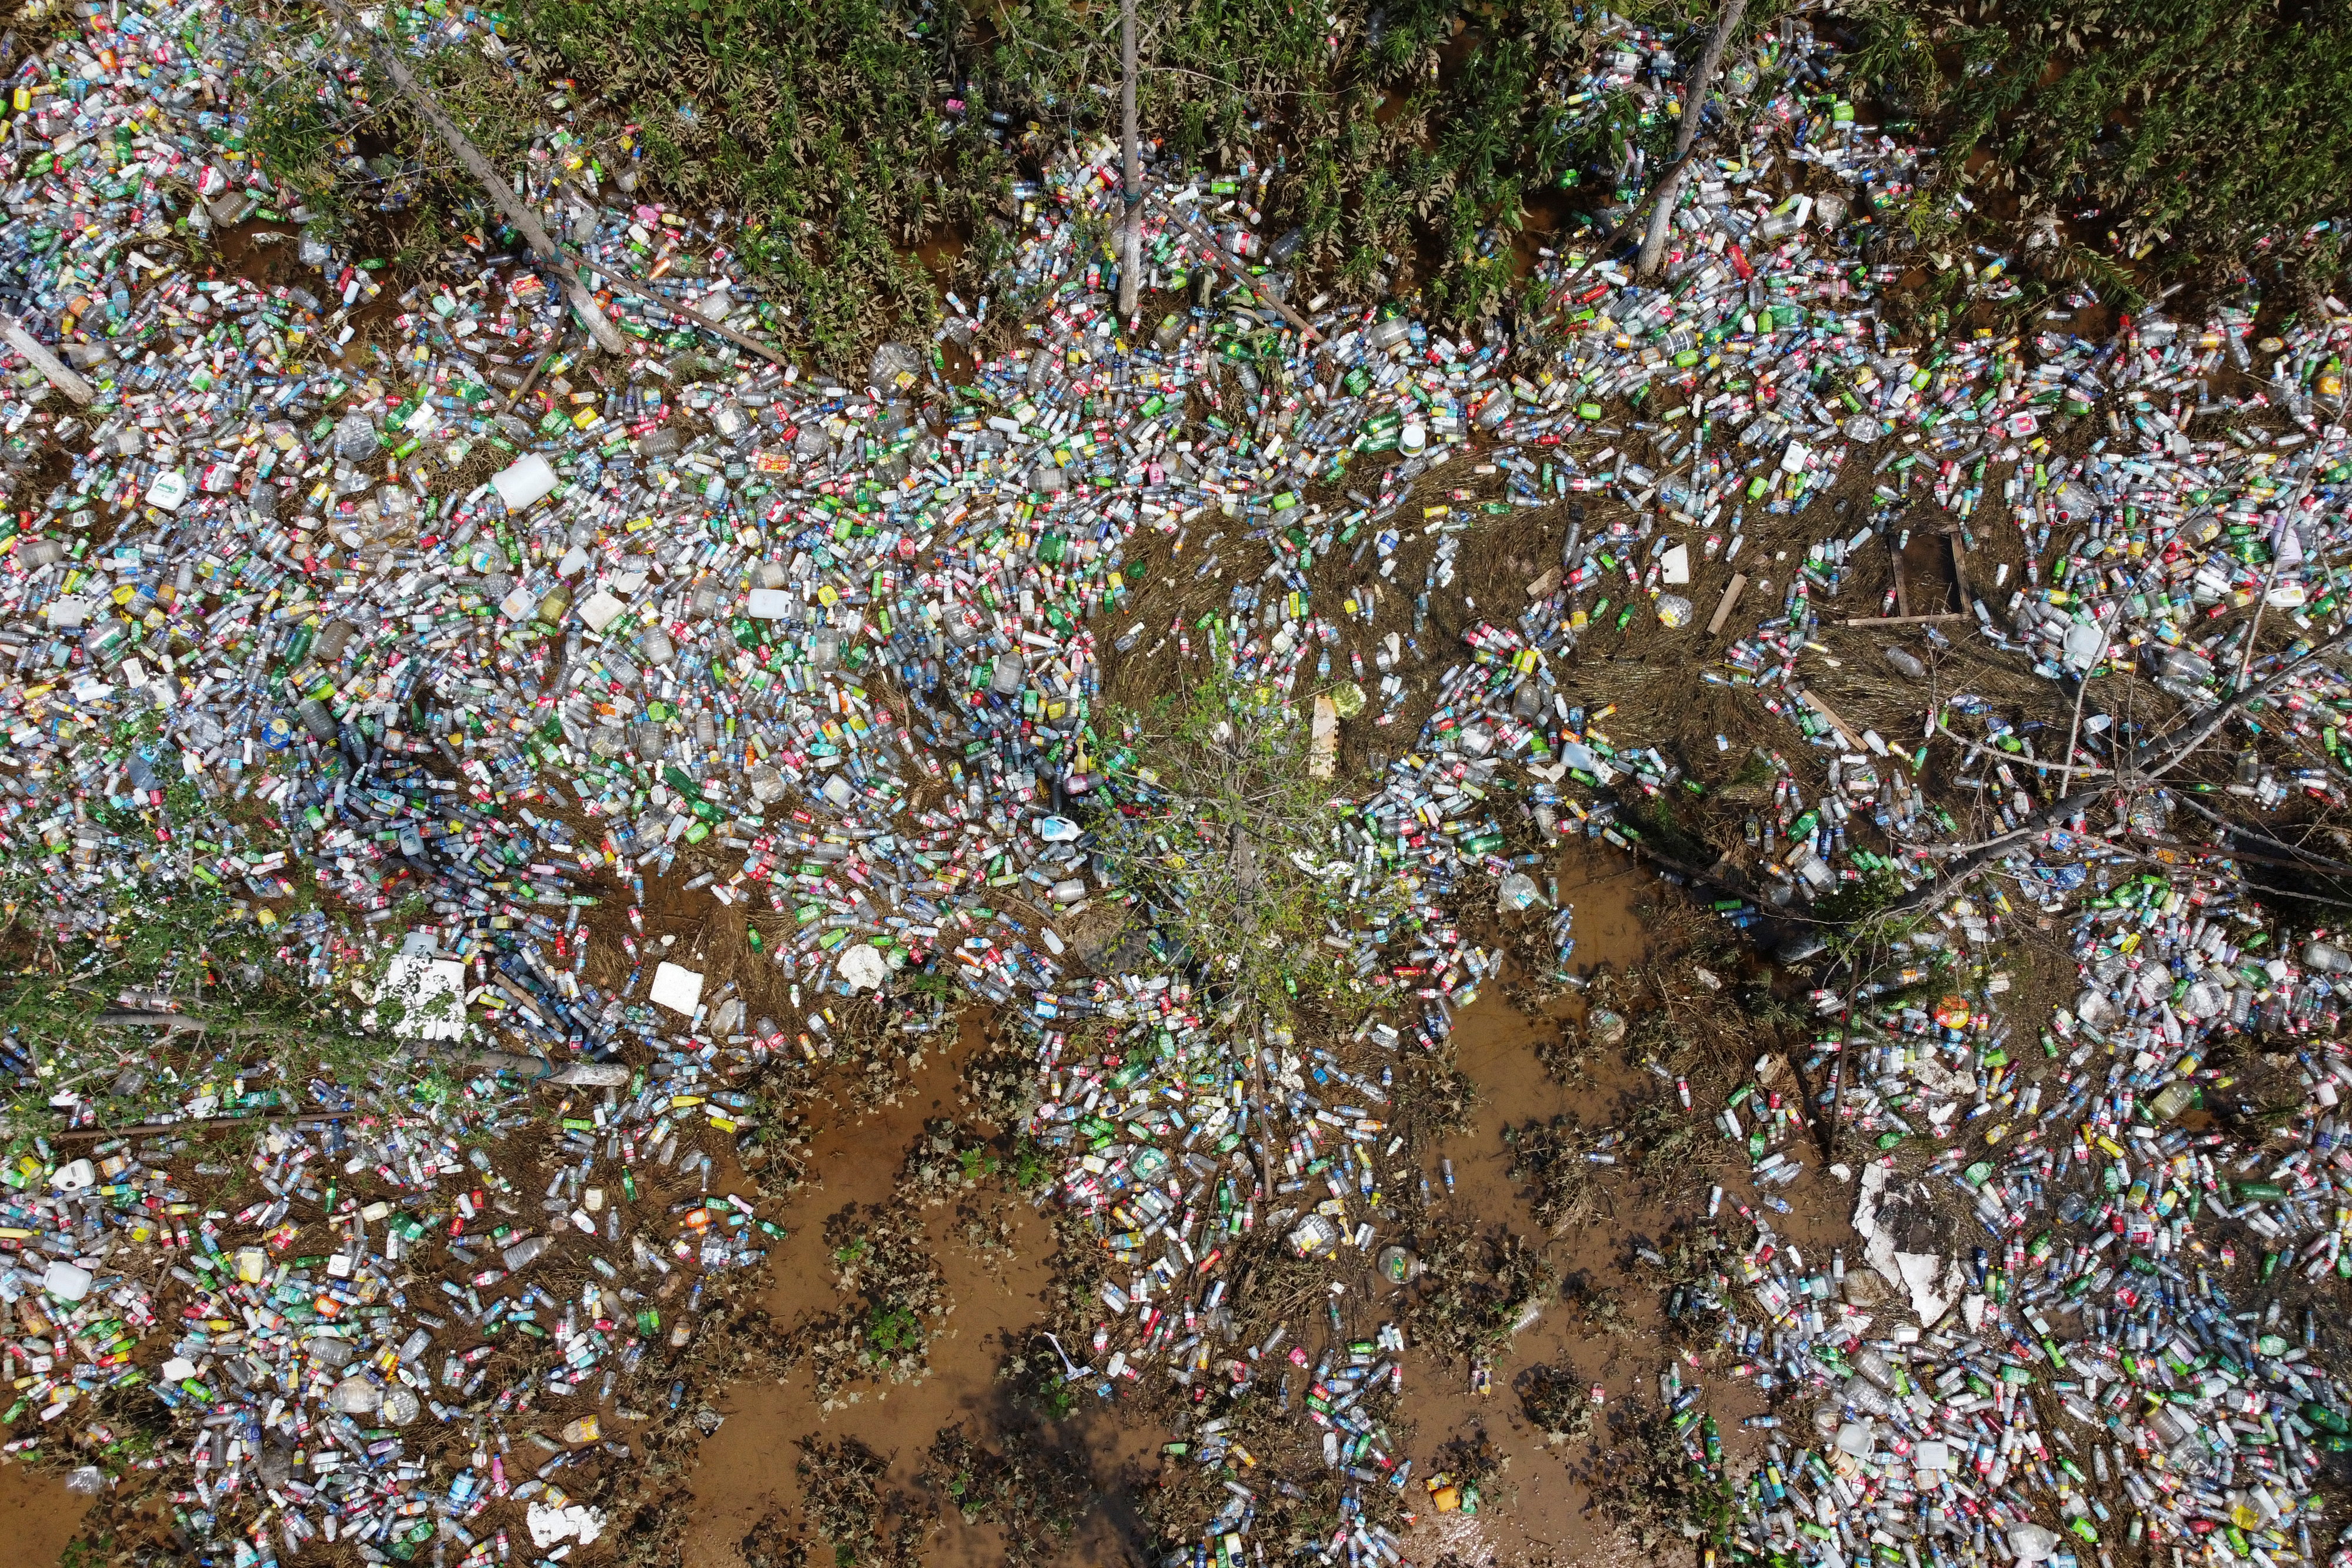 Plastic bottles are seen in a ditch where floodwaters have receded following heavy rainfall in Xinxiang